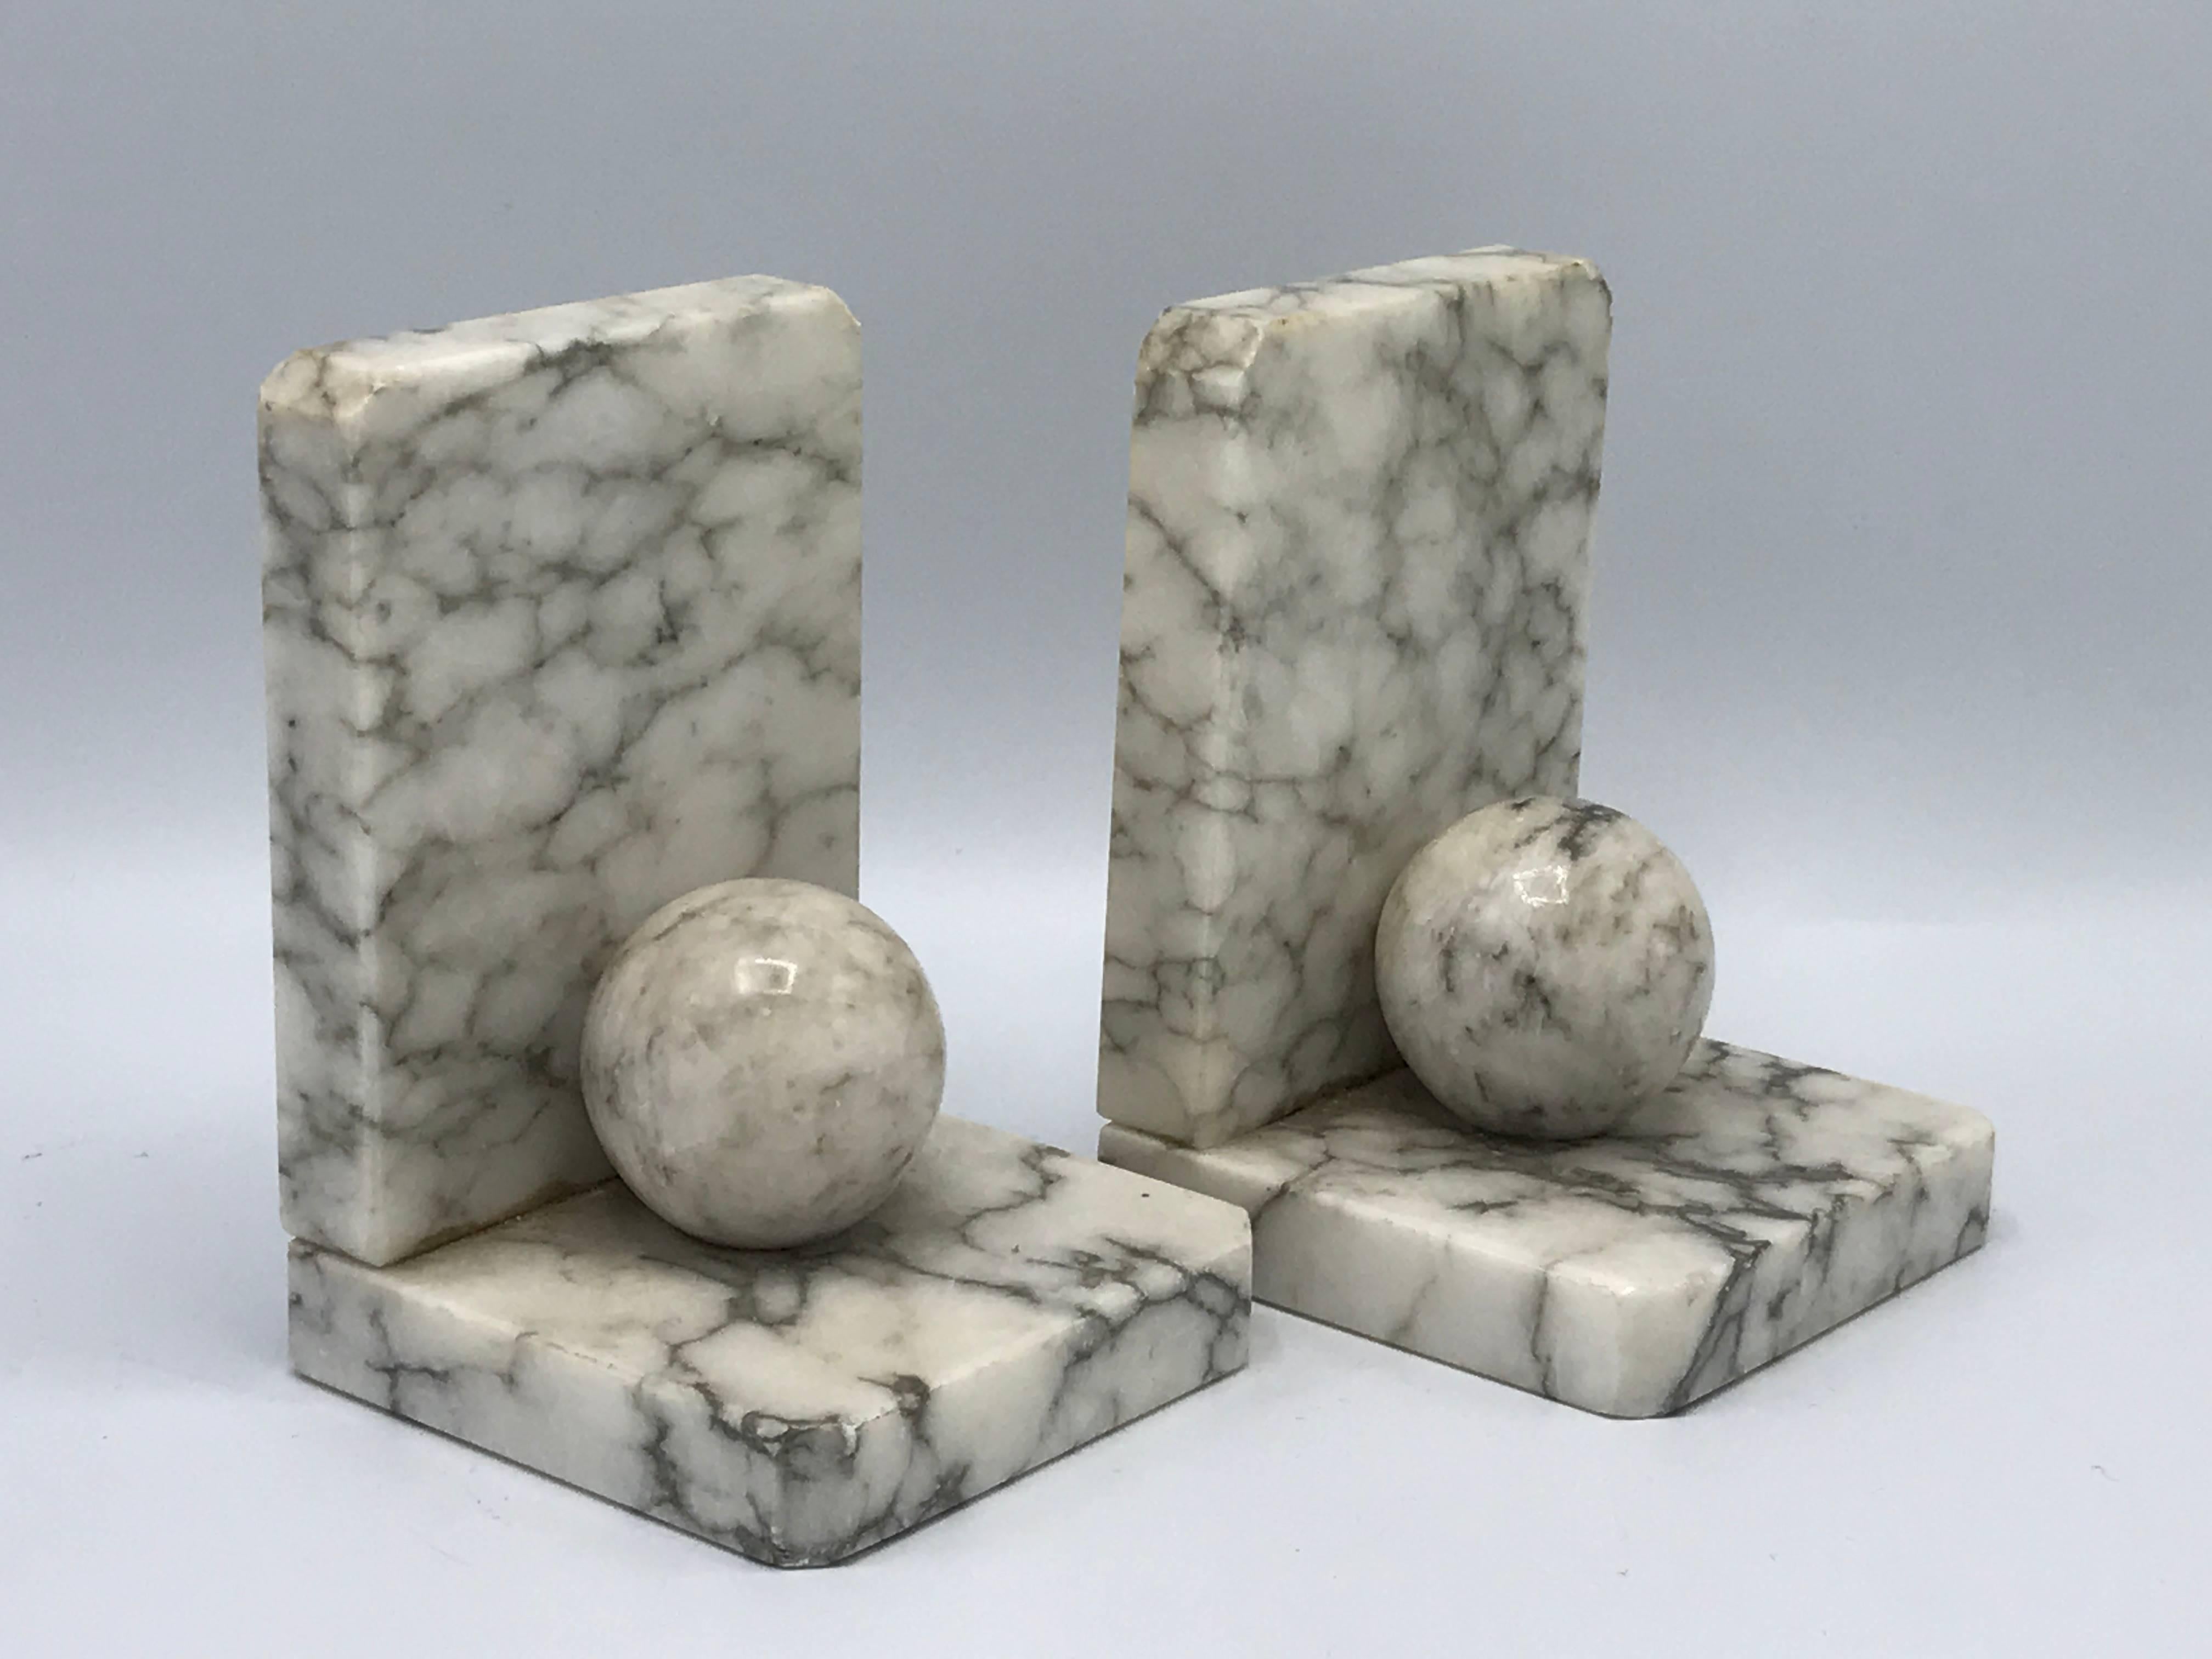 Offered is a stunning pair of 1940s, Italian, Carrara marble orb bookends. Marked, Made in Italy.